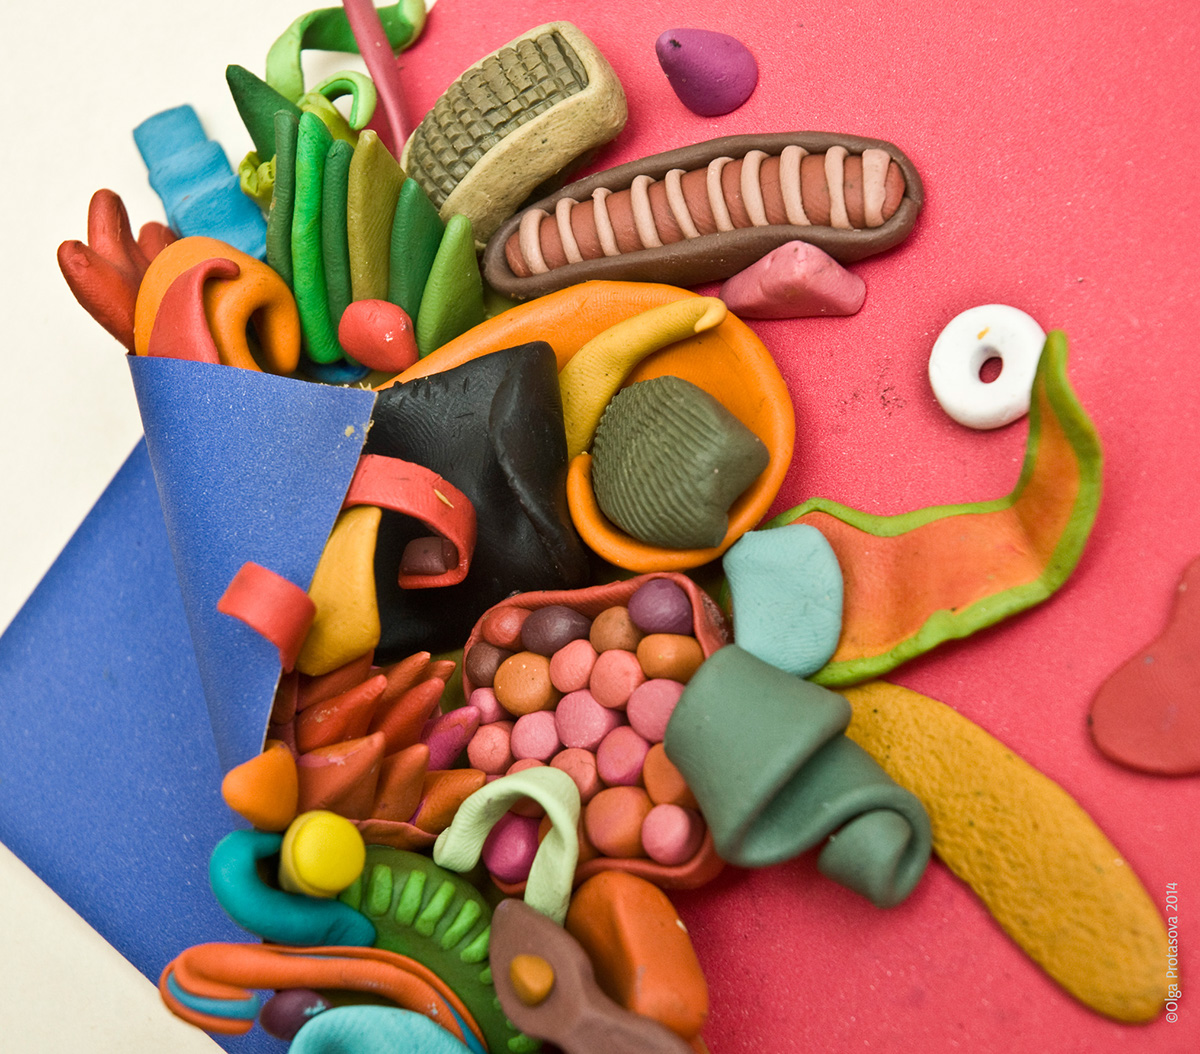 Plasticine clay new year begining page